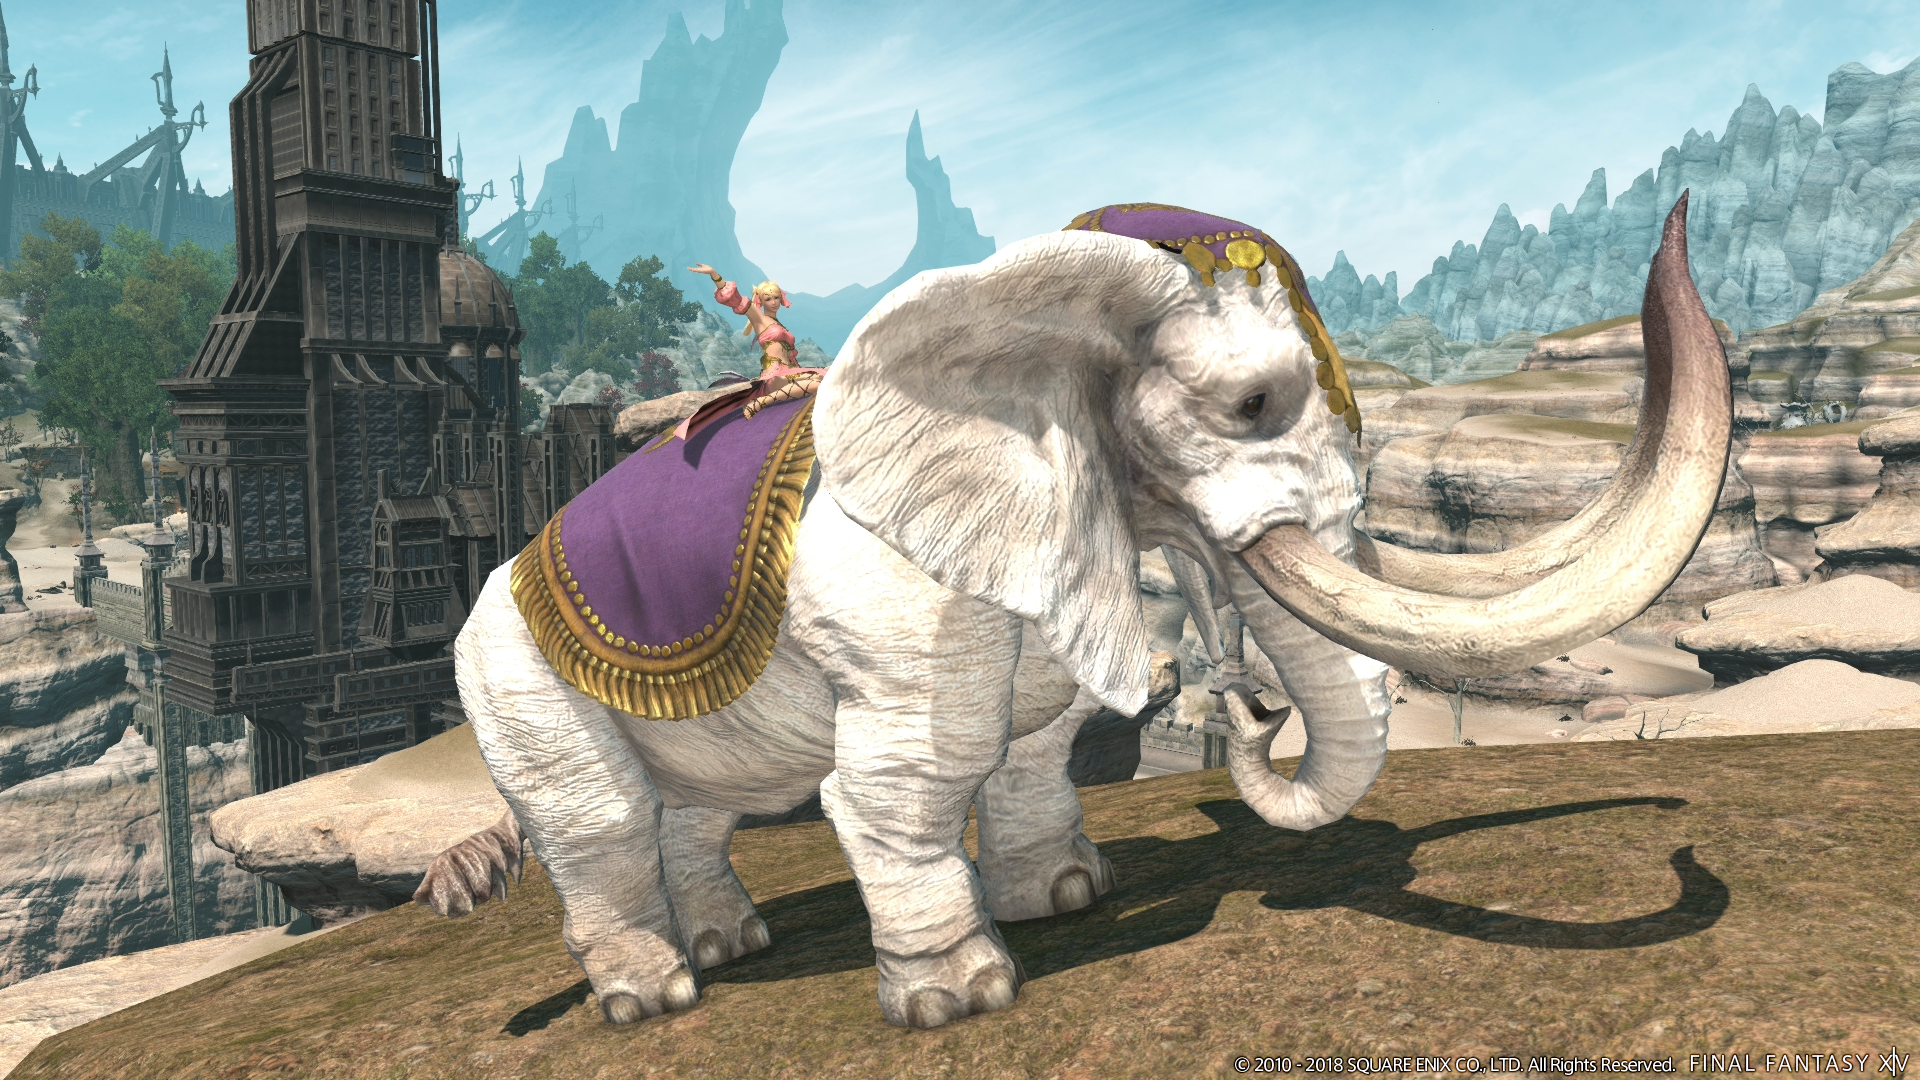 Final Fantasy XIV previews beasts, Feasts, and glamorous feats.